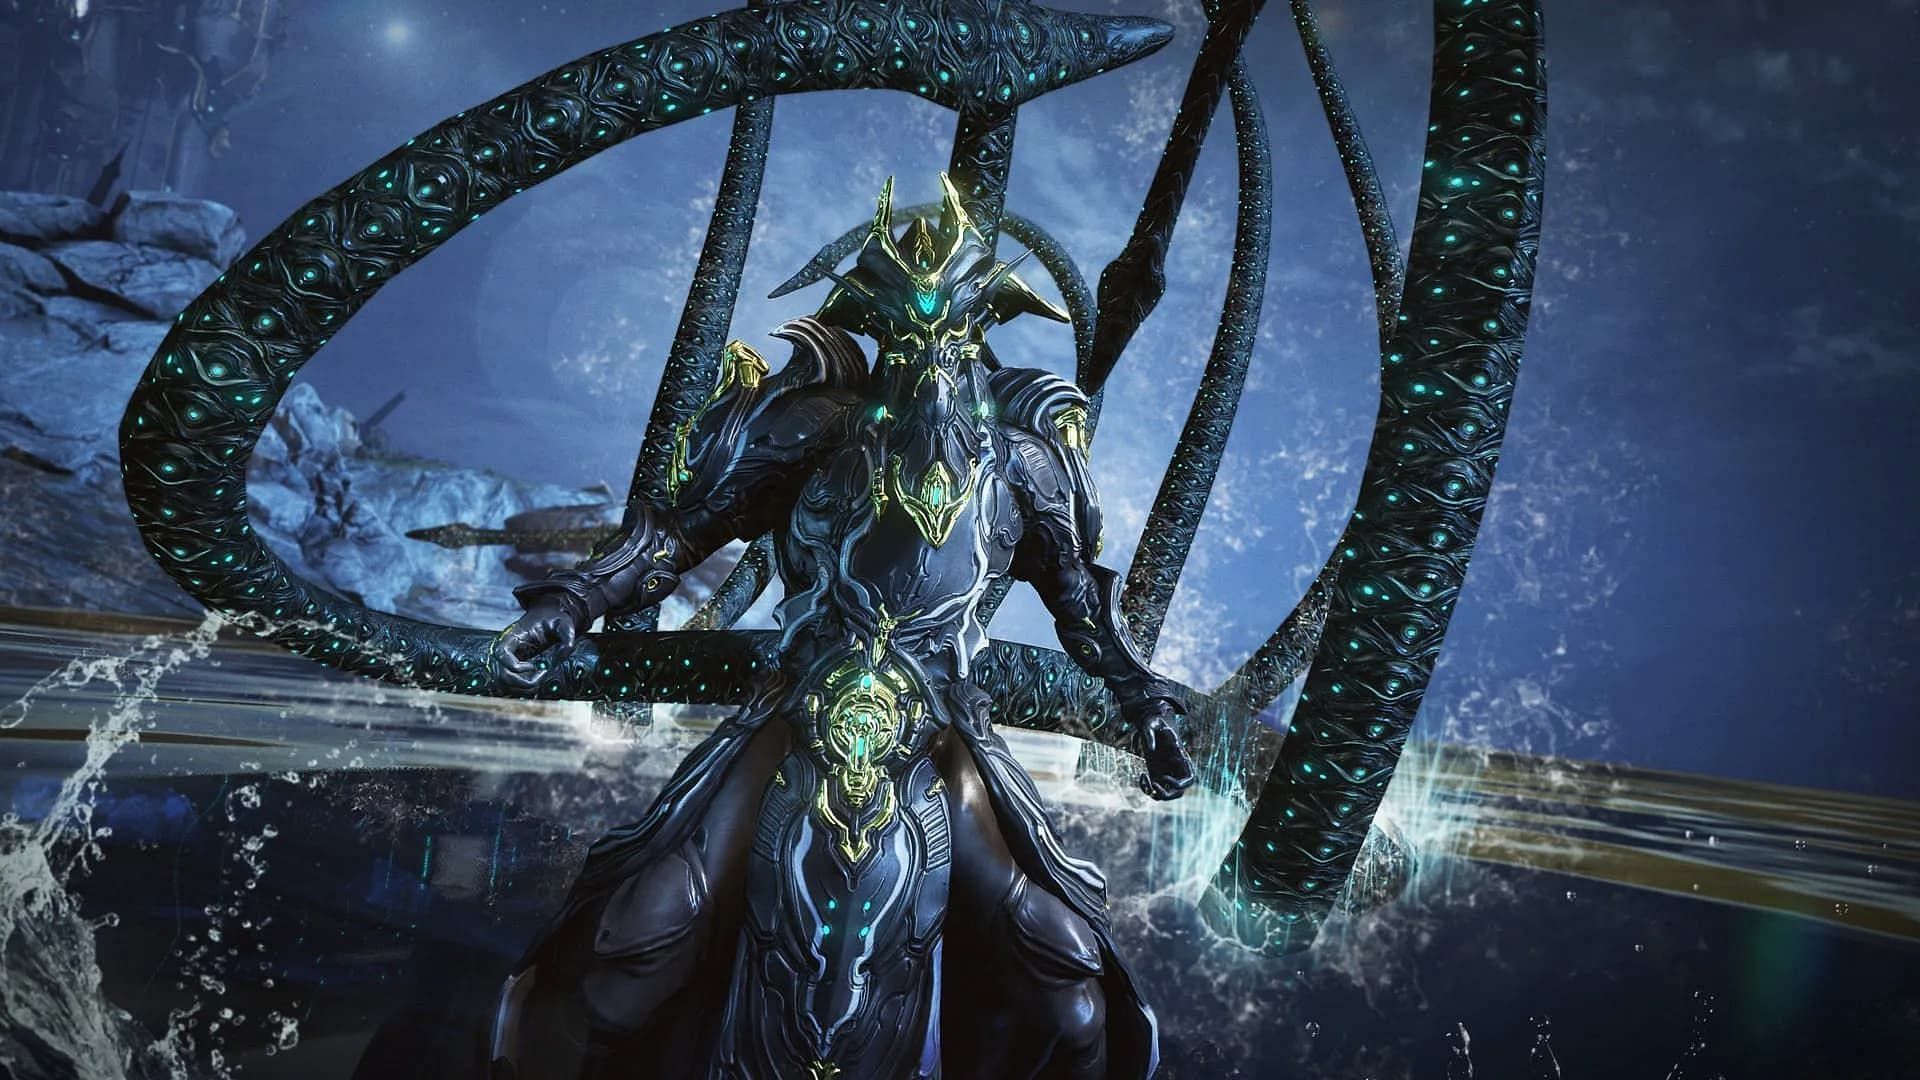 Warframe Hydroid Prime captura with tentacles in the background